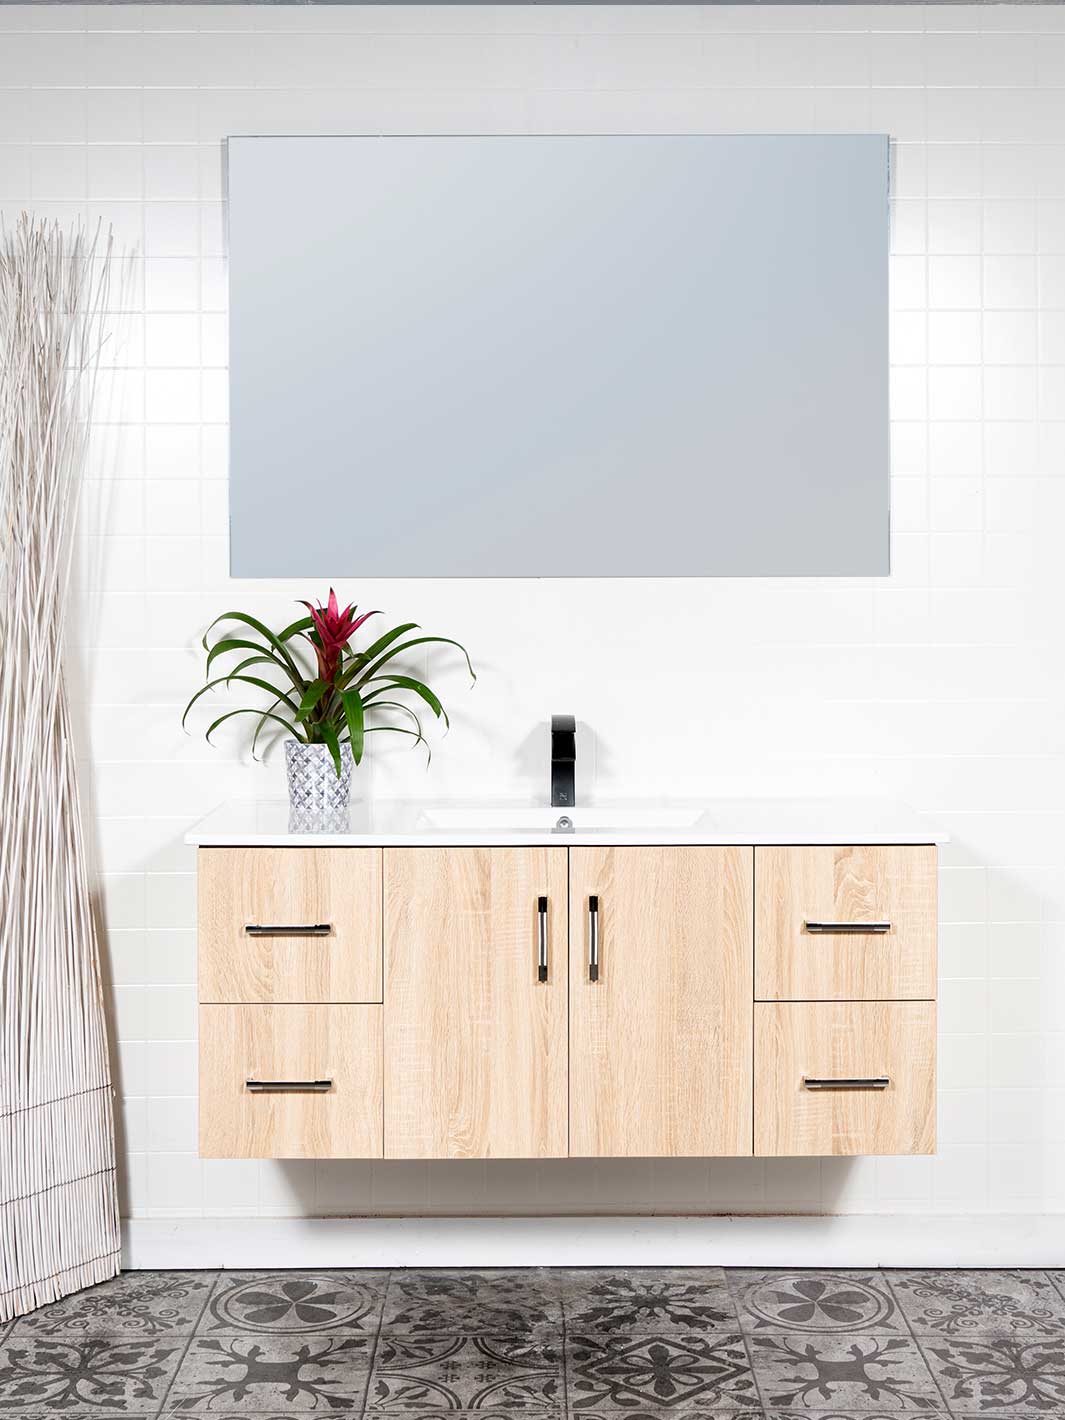 Captivating design focal point: the statement-making floating vanity插图